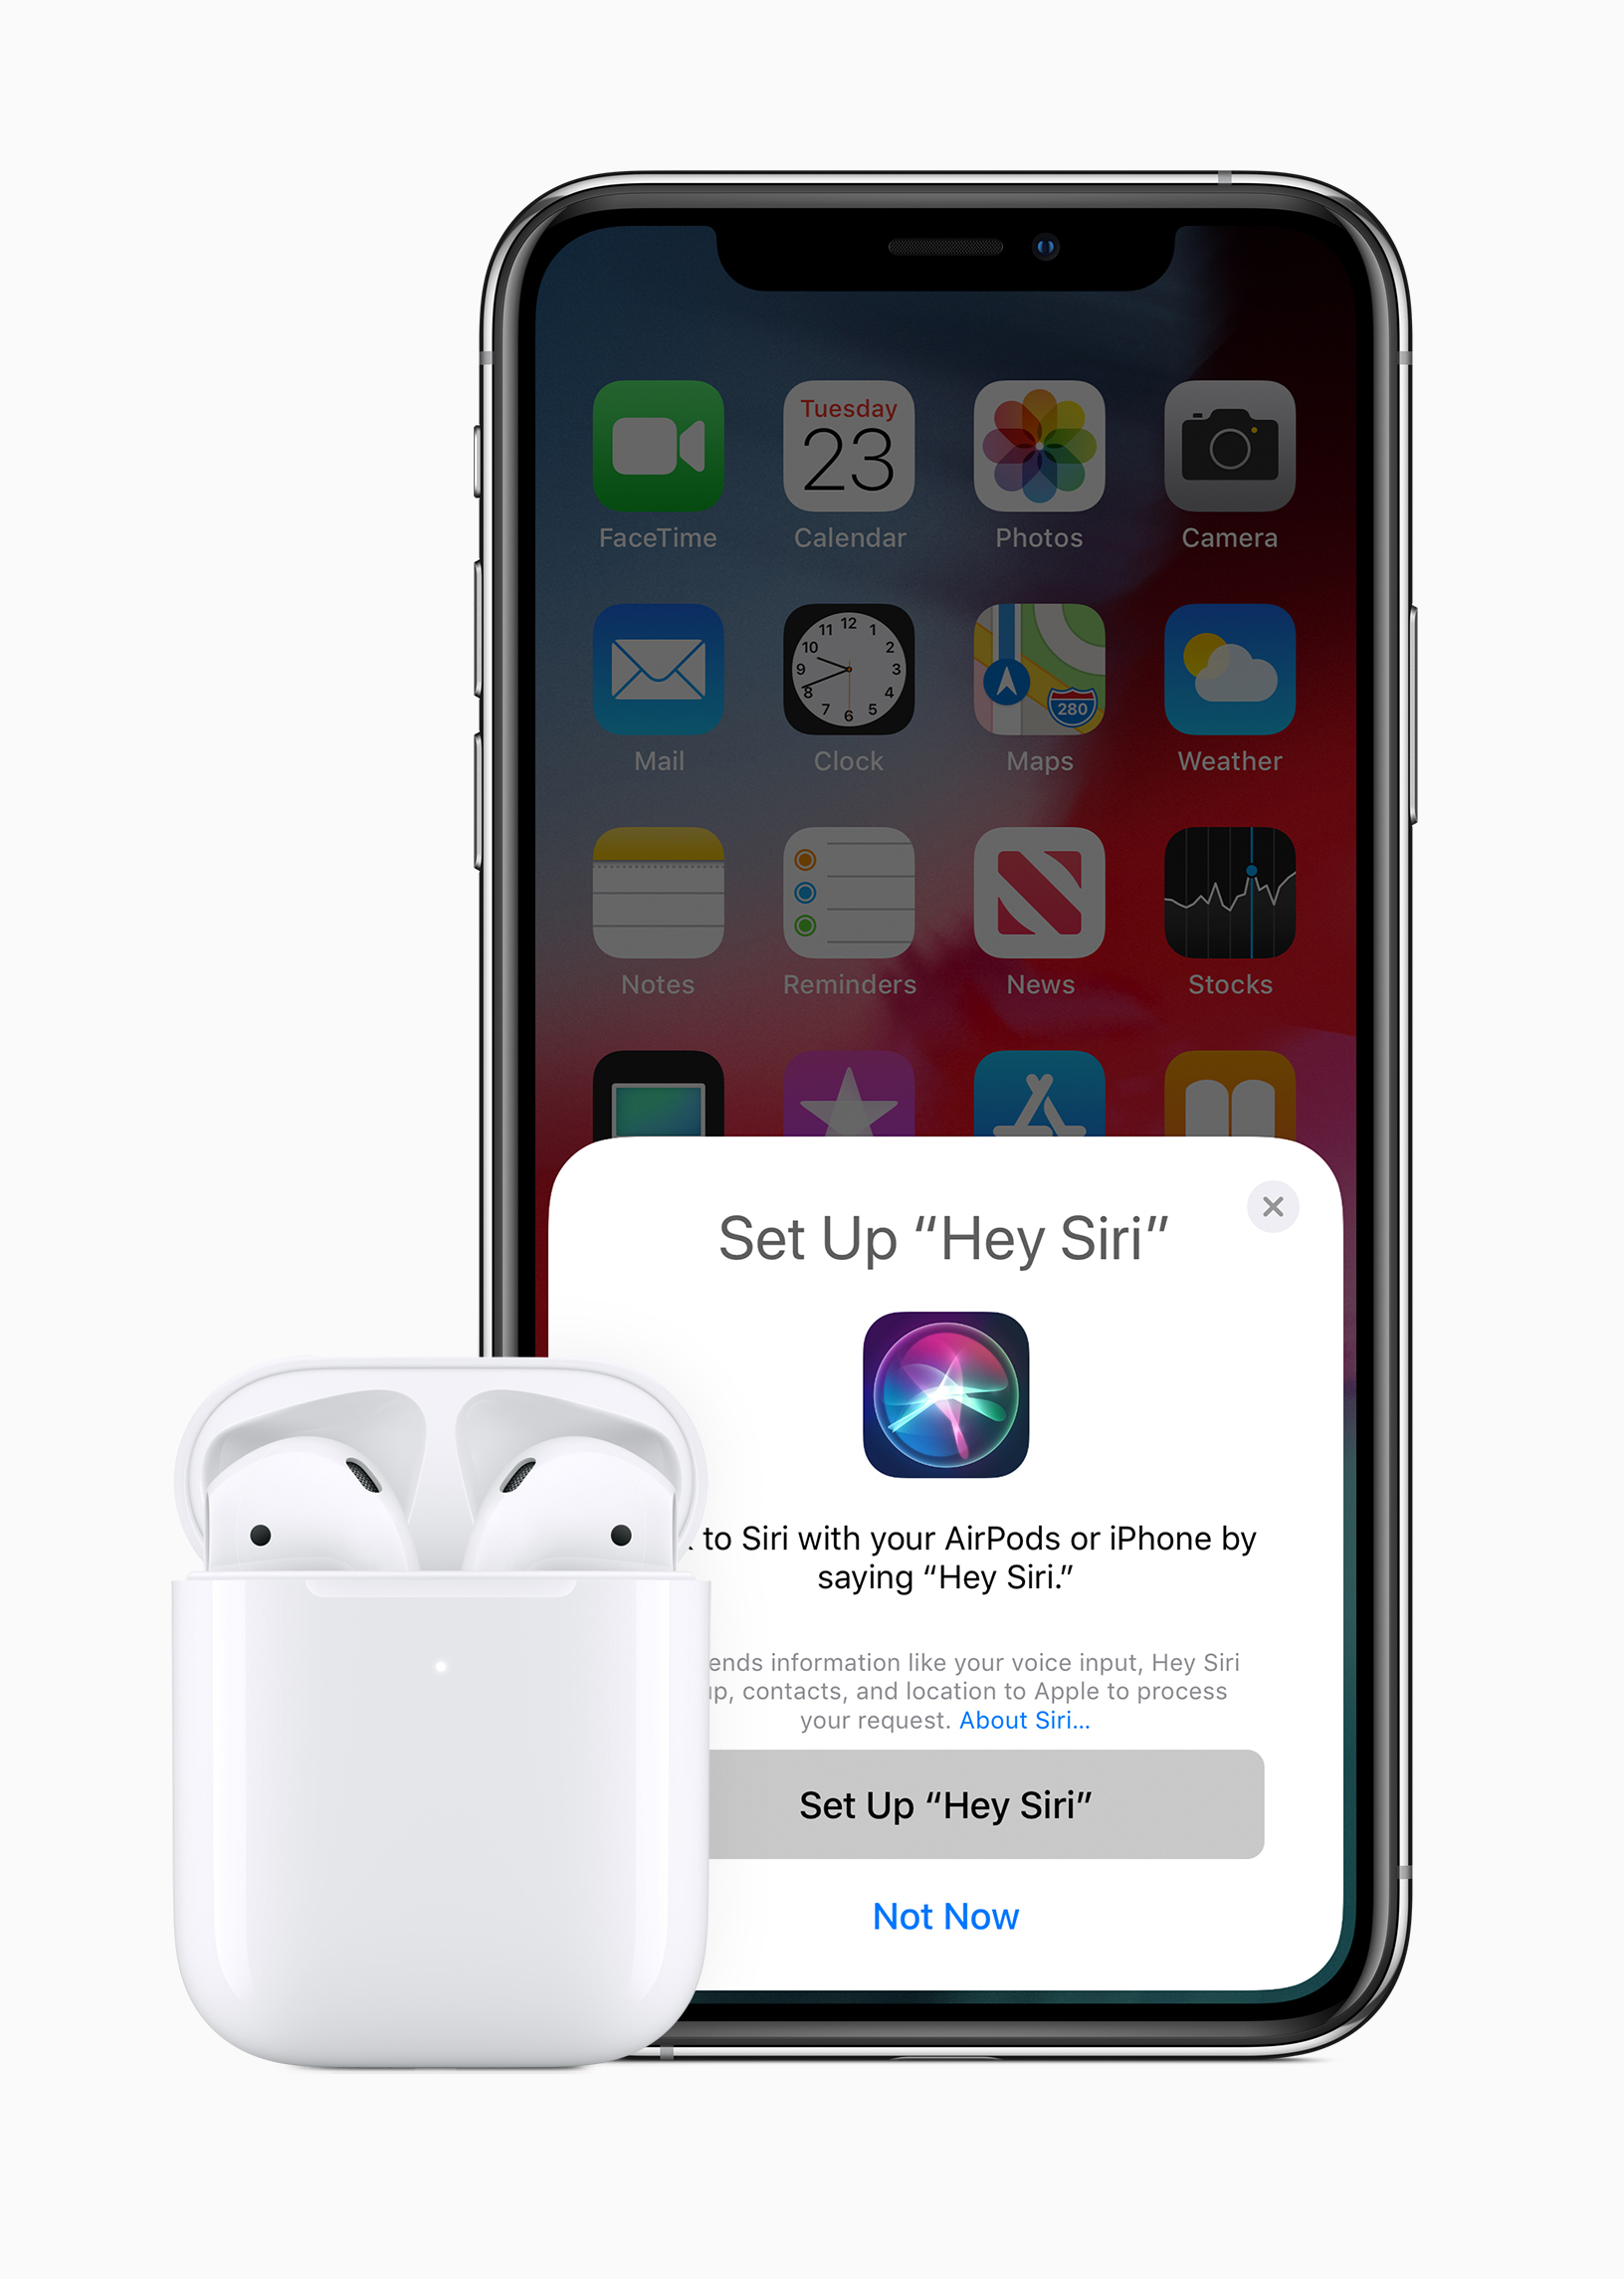 New Apple AirPods Now Available - New Earbuds Feature H1 Chip, Hands-Free 'Hey Siri,' Wireless Charging Case